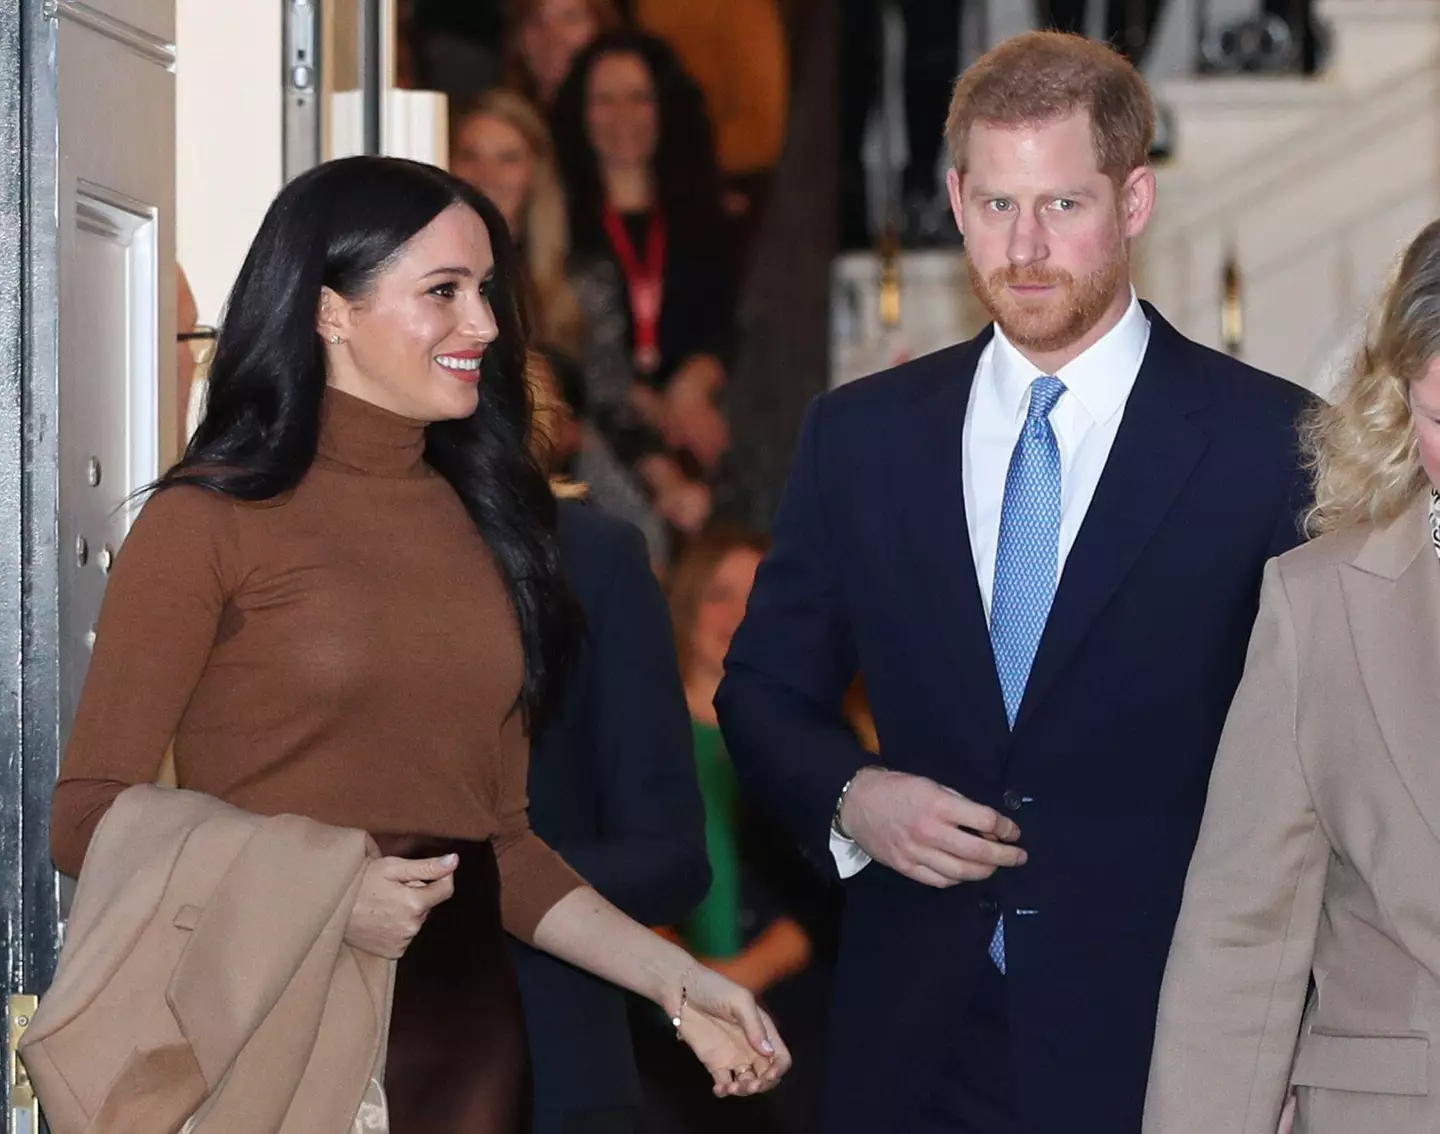 Prince Harry and Meghan Markle pictured in London in January 2020. (